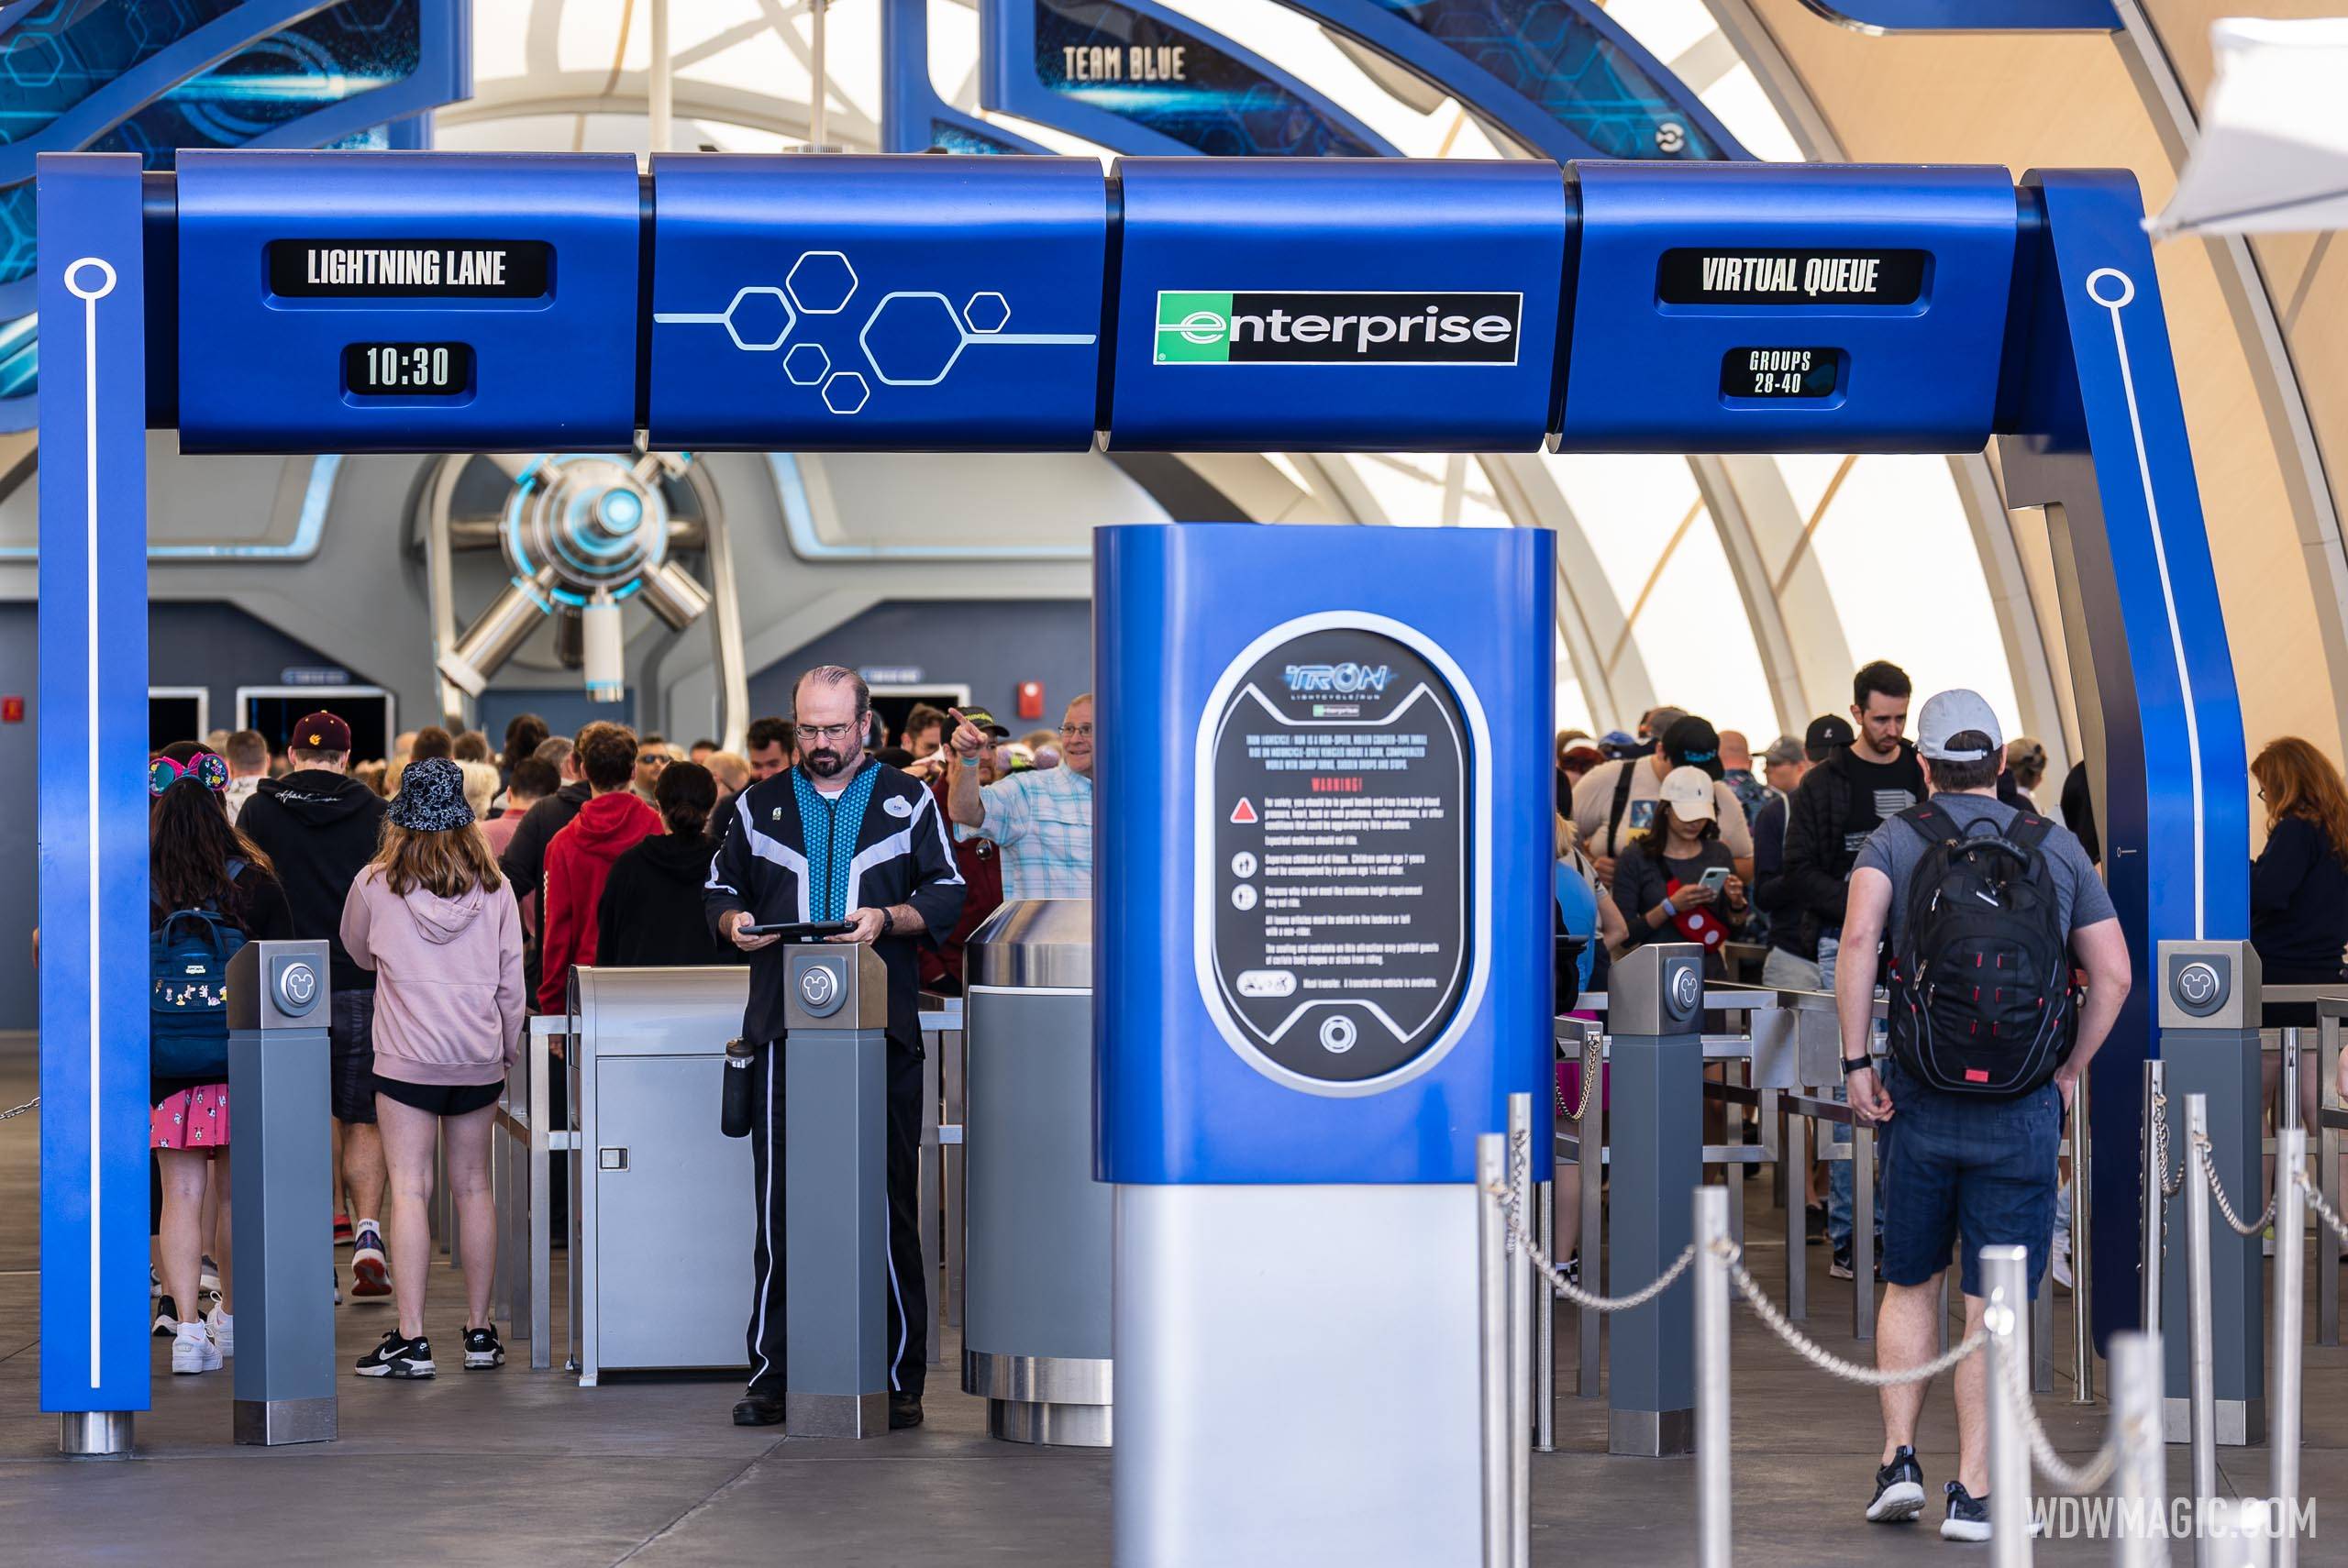 TRON Lightcycle Run Individual Lightning Lane pricing has remained unchanged since opening